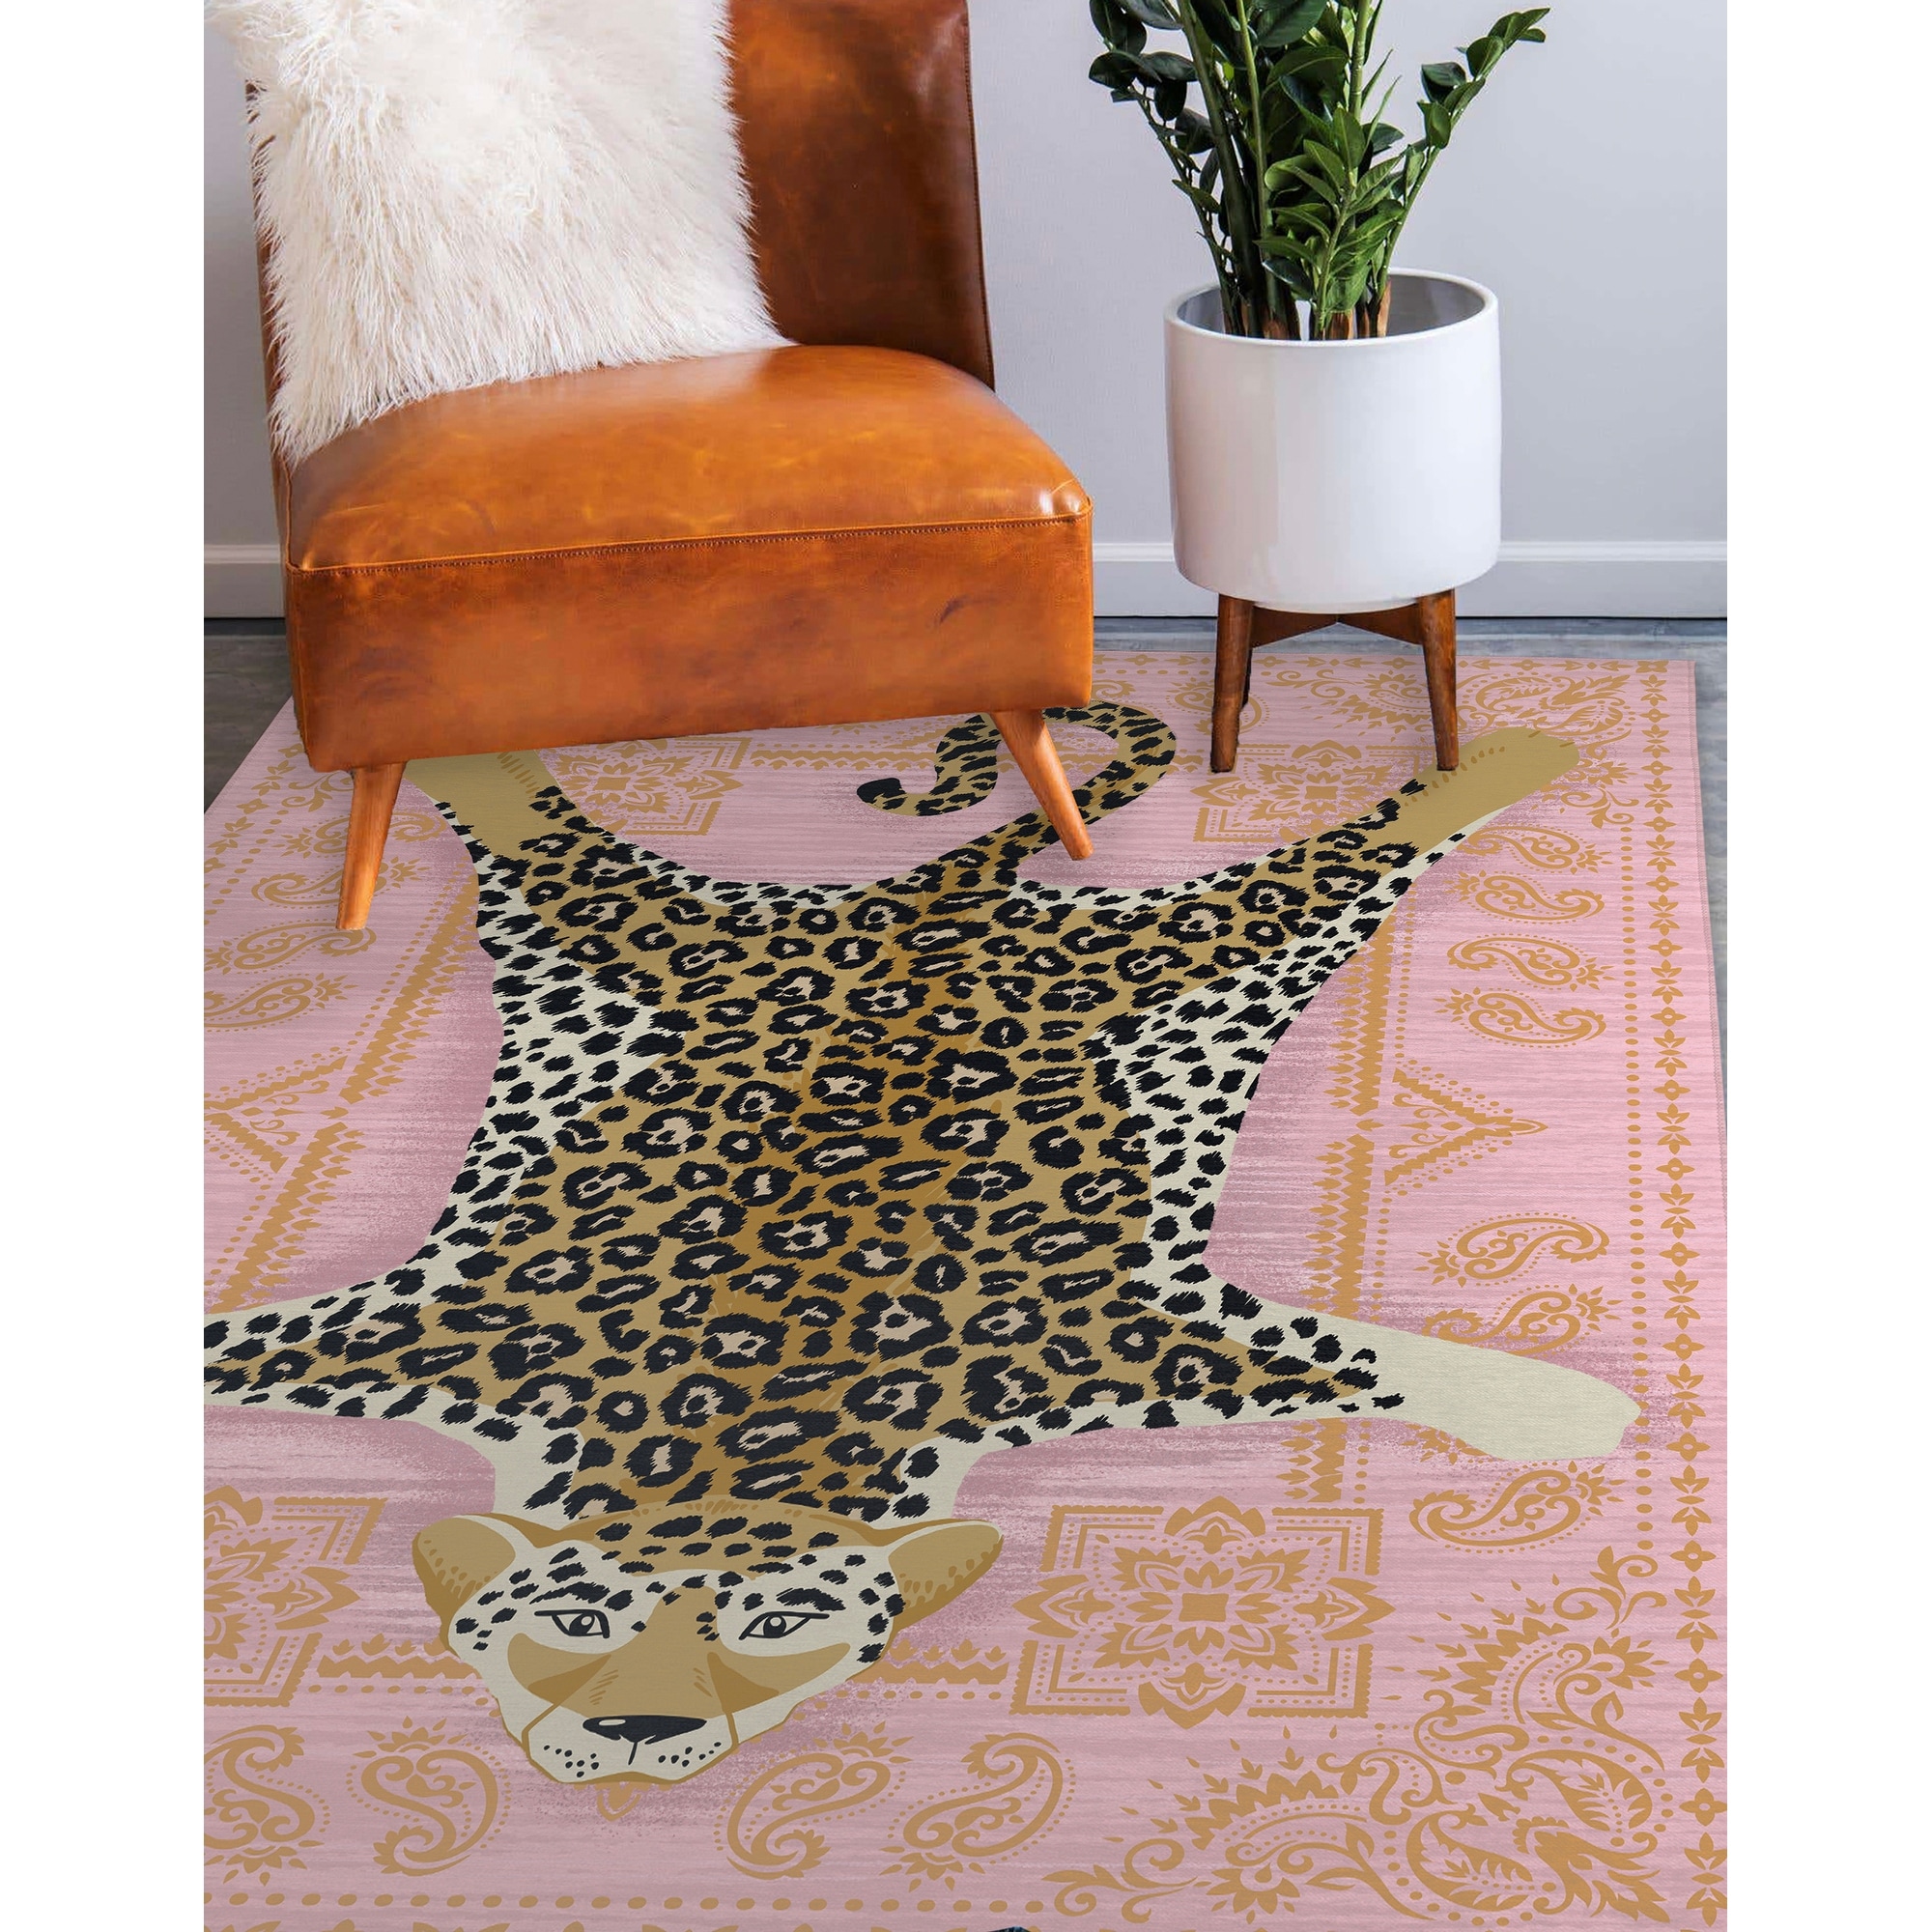 https://ak1.ostkcdn.com/images/products/is/images/direct/82a16c49970194208621edfd4bd7dff2cb625a34/LEOPARD-PINK-Area-Rug-By-Kavka-Designs.jpg